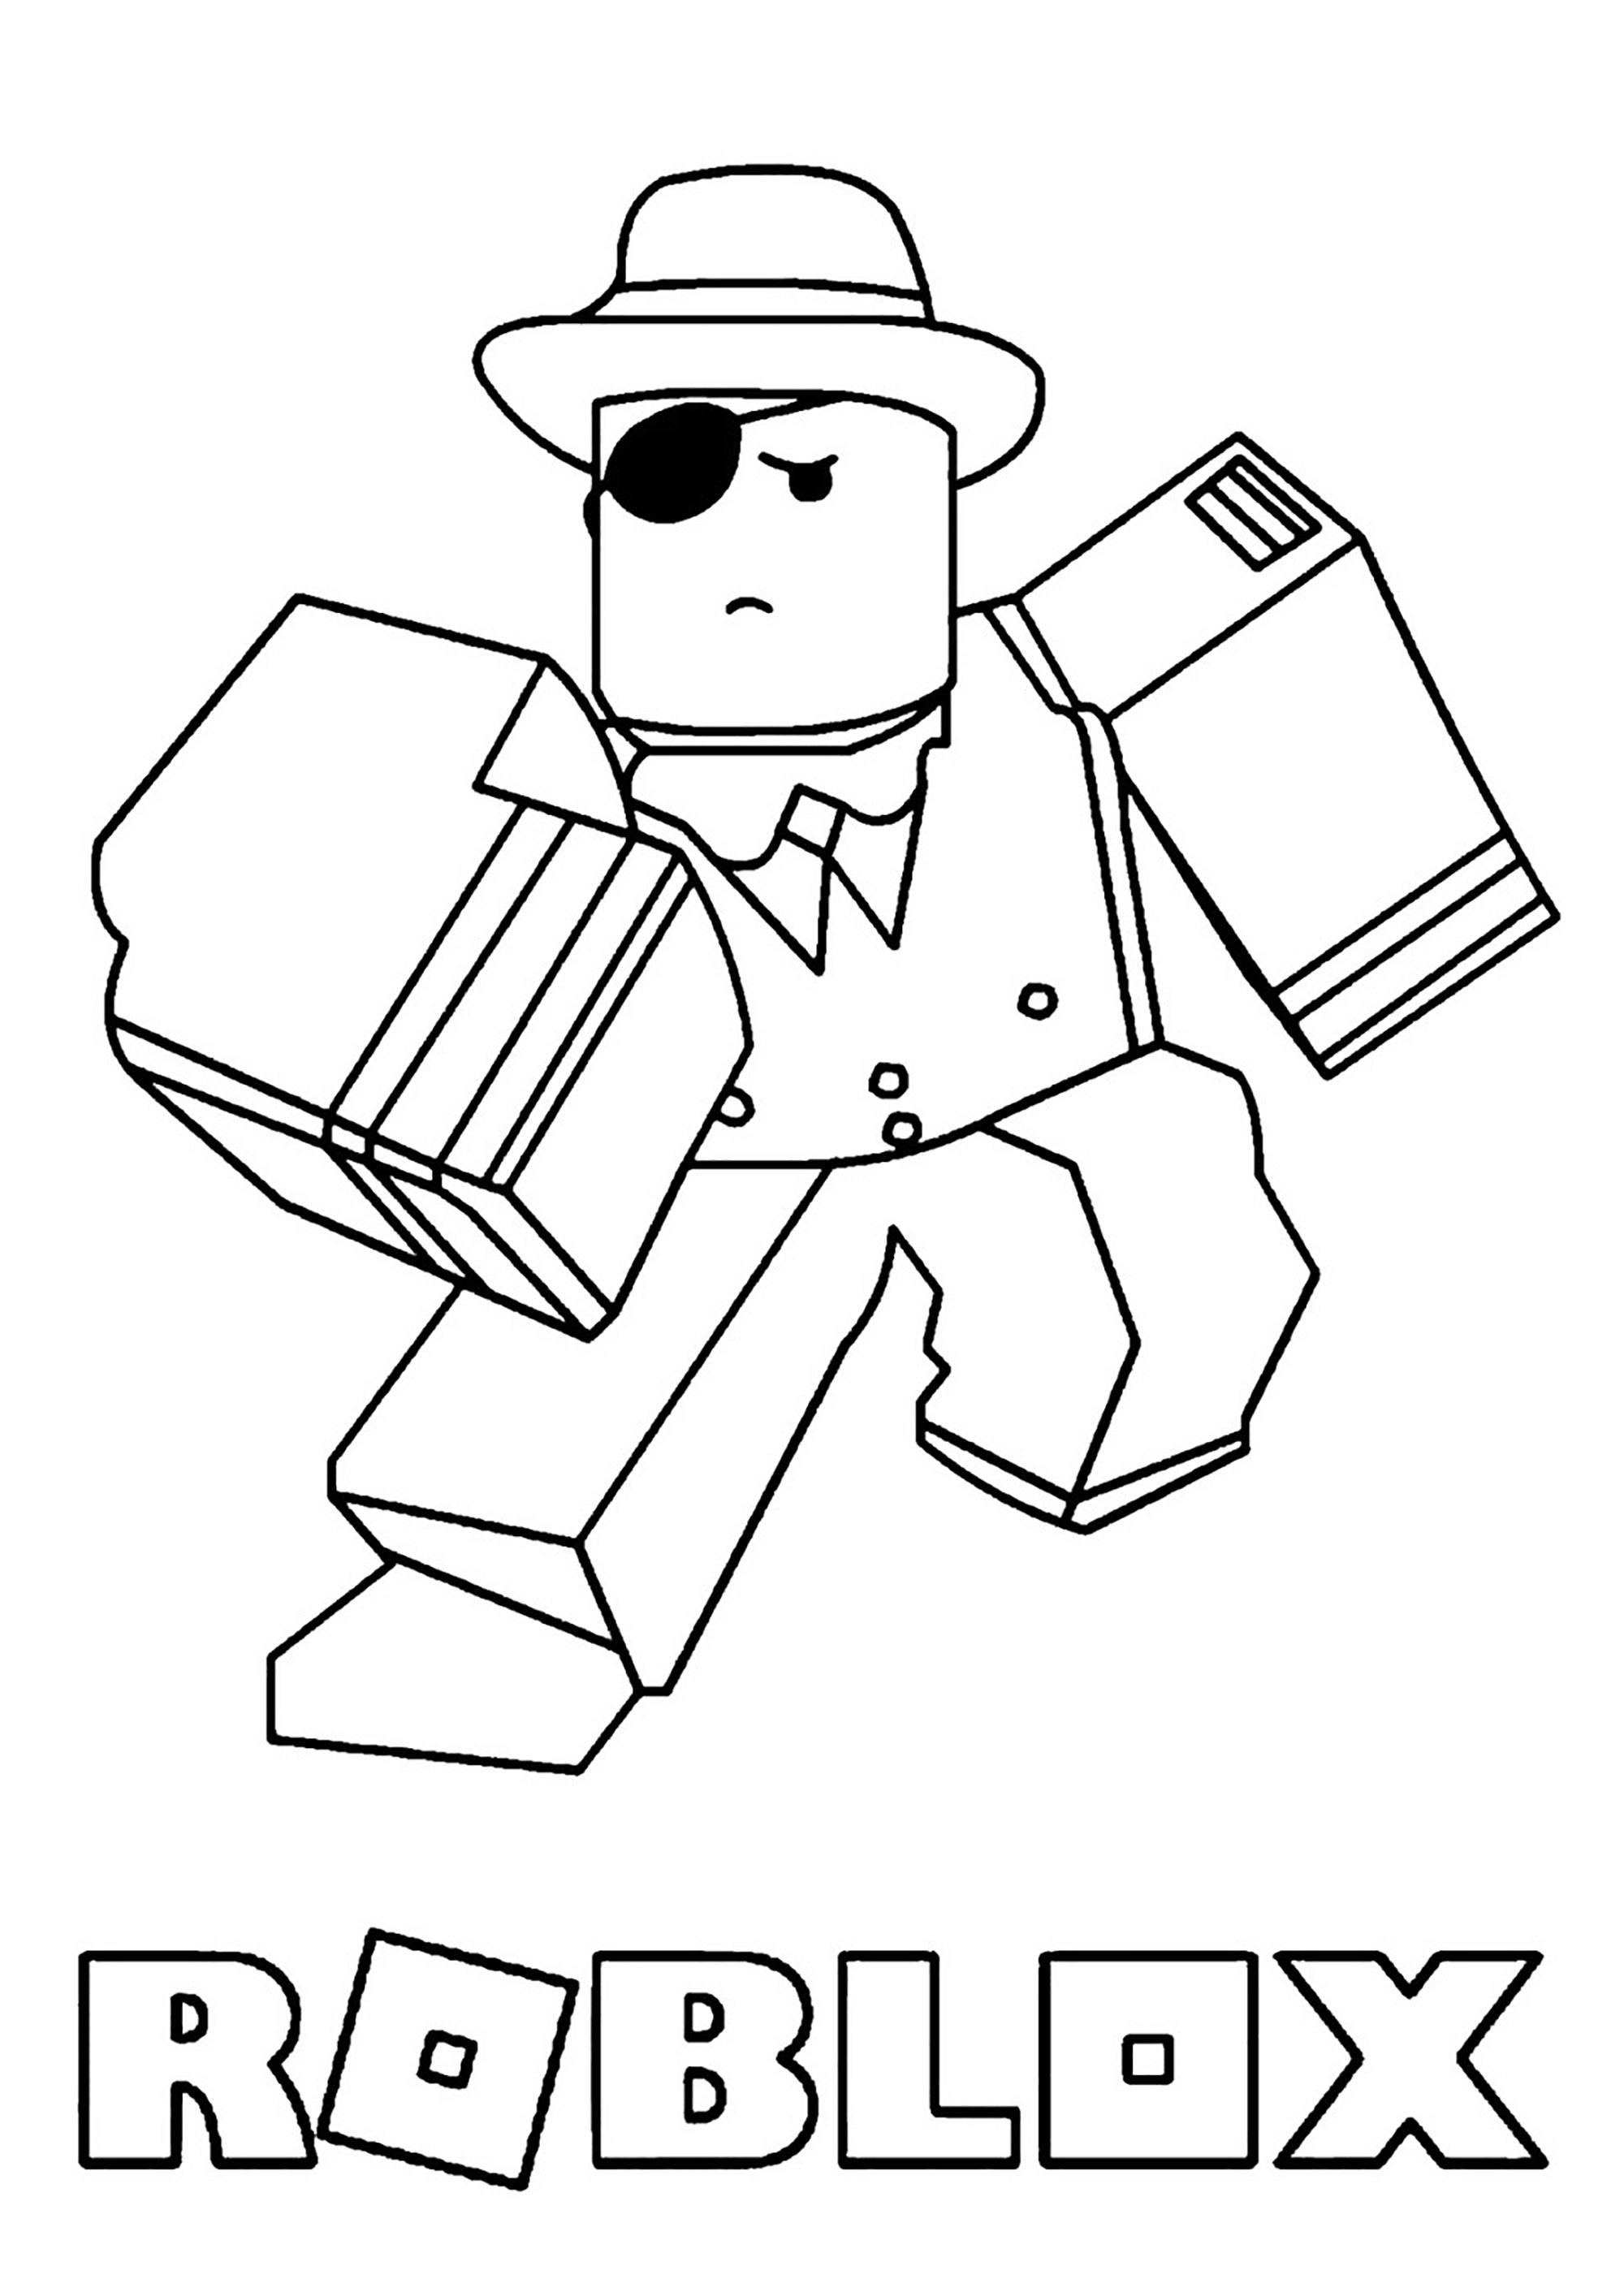 Roblox : character with a pirate eye patch - Roblox Kids Coloring Pages